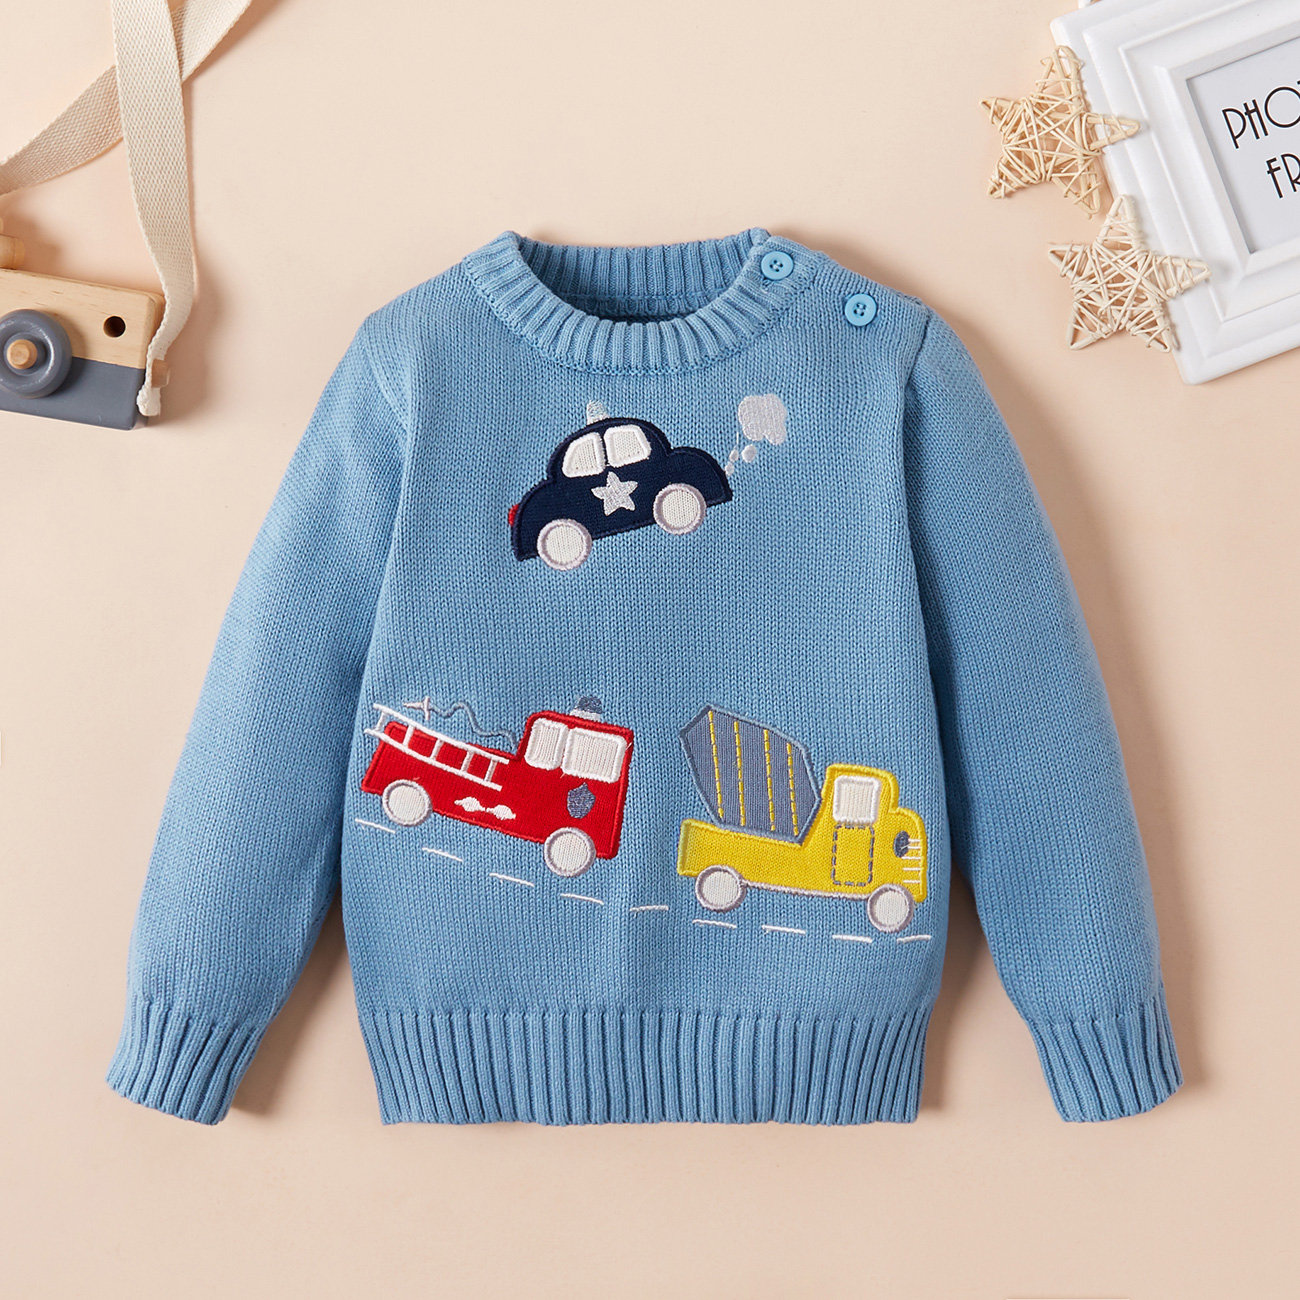 Baby / Toddler Boy Cartoon Car Embroidery Knitted Sweater (No Shirt and Shoes)